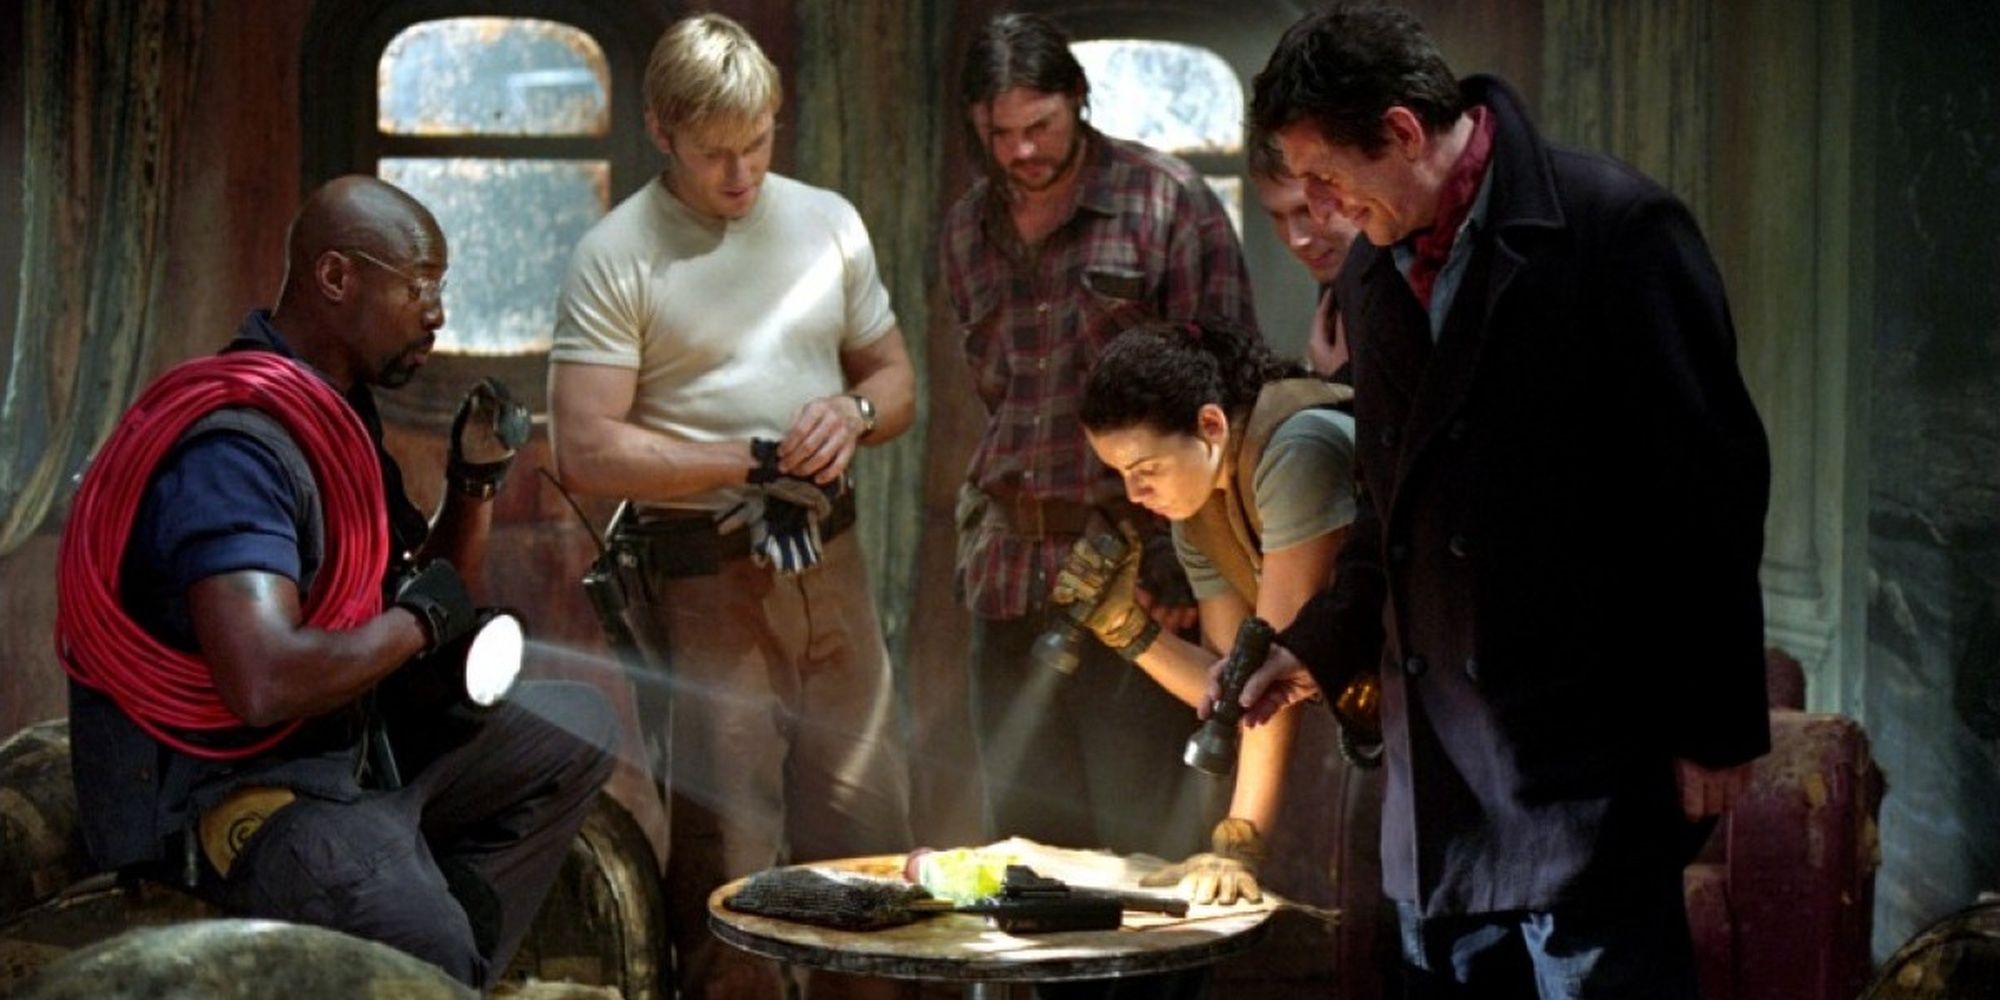 A salvaging crew staring at plans on a table